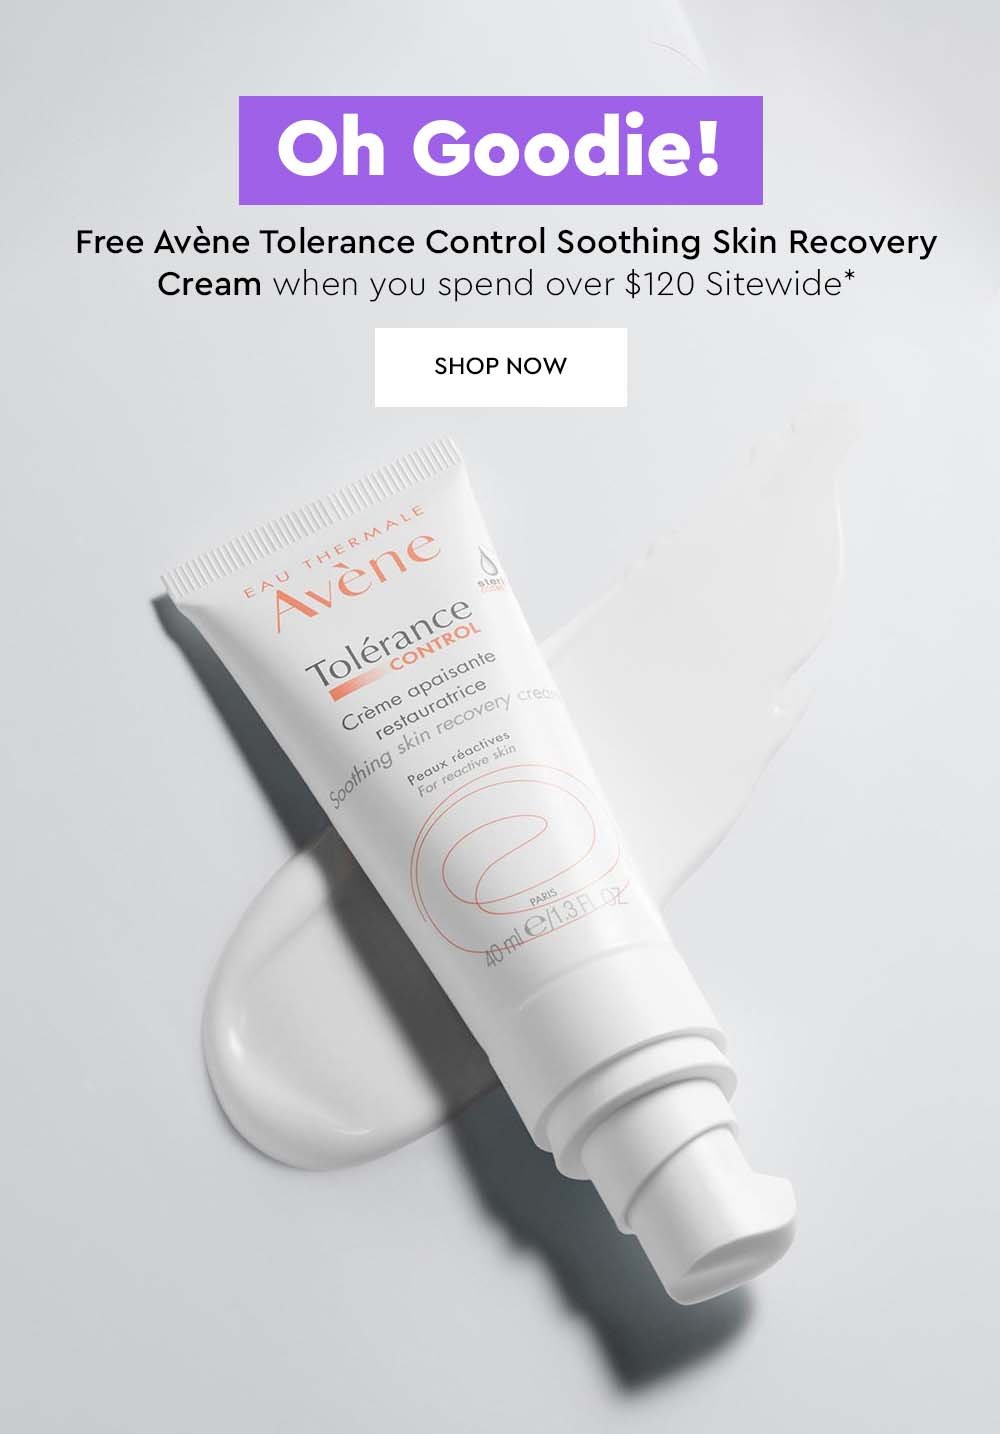 Free Avène Tolerance Control Soothing Skin Recovery Cream when you spend over $120 Sitewide*